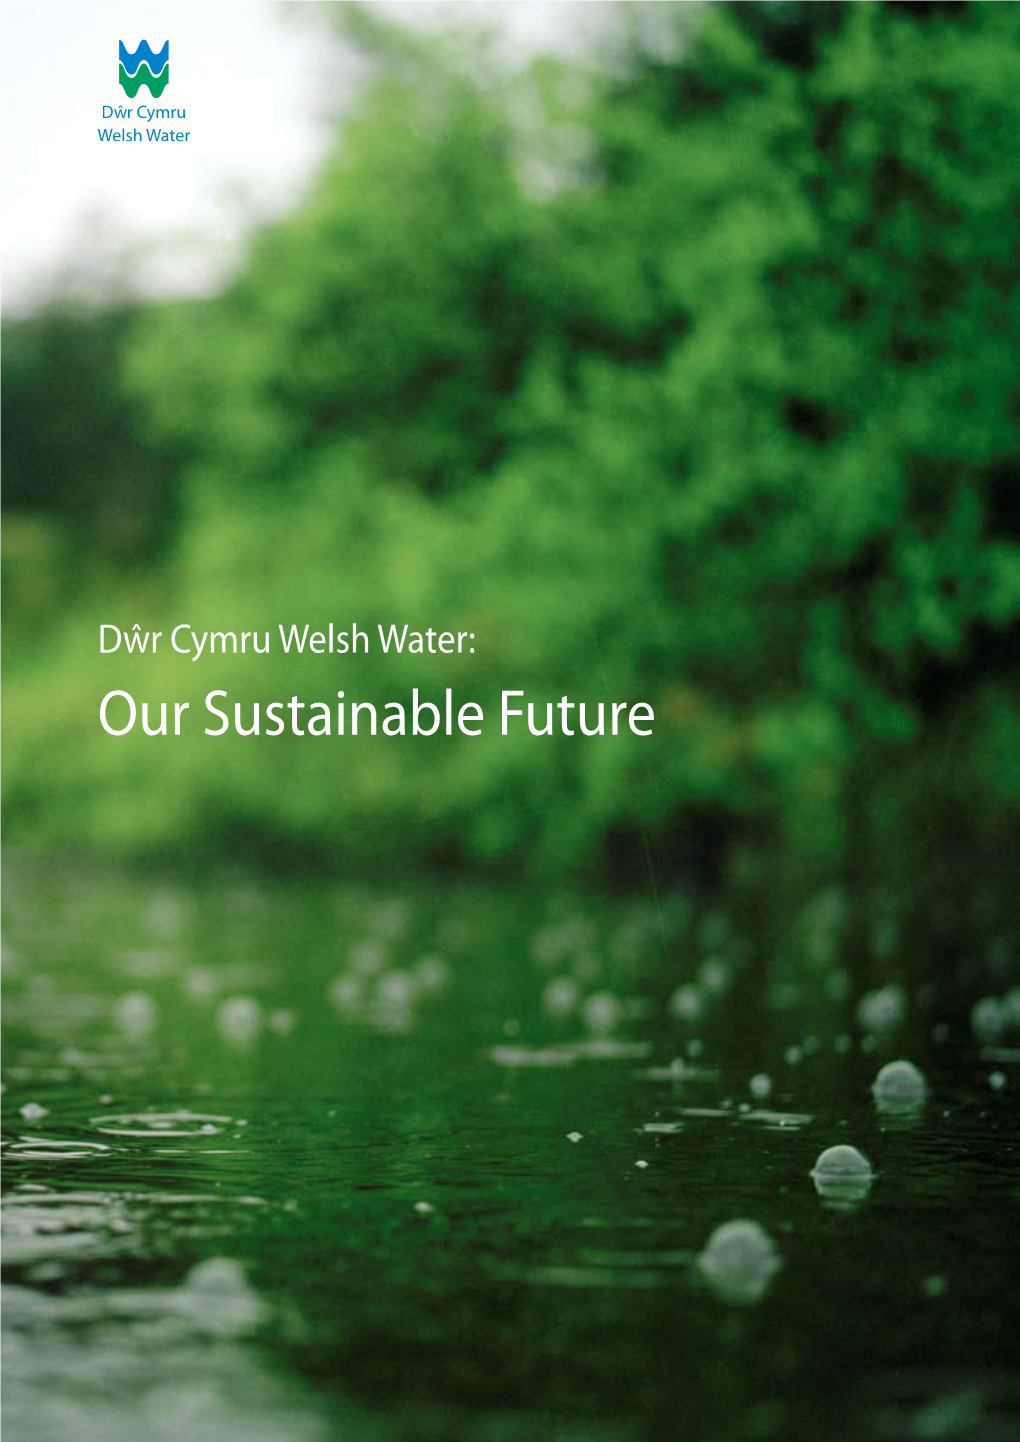 Our Sustainable Future 1 Foreword 2 Our Business Your Views: We Would Welcome Comments on This 4 Our Goal Document